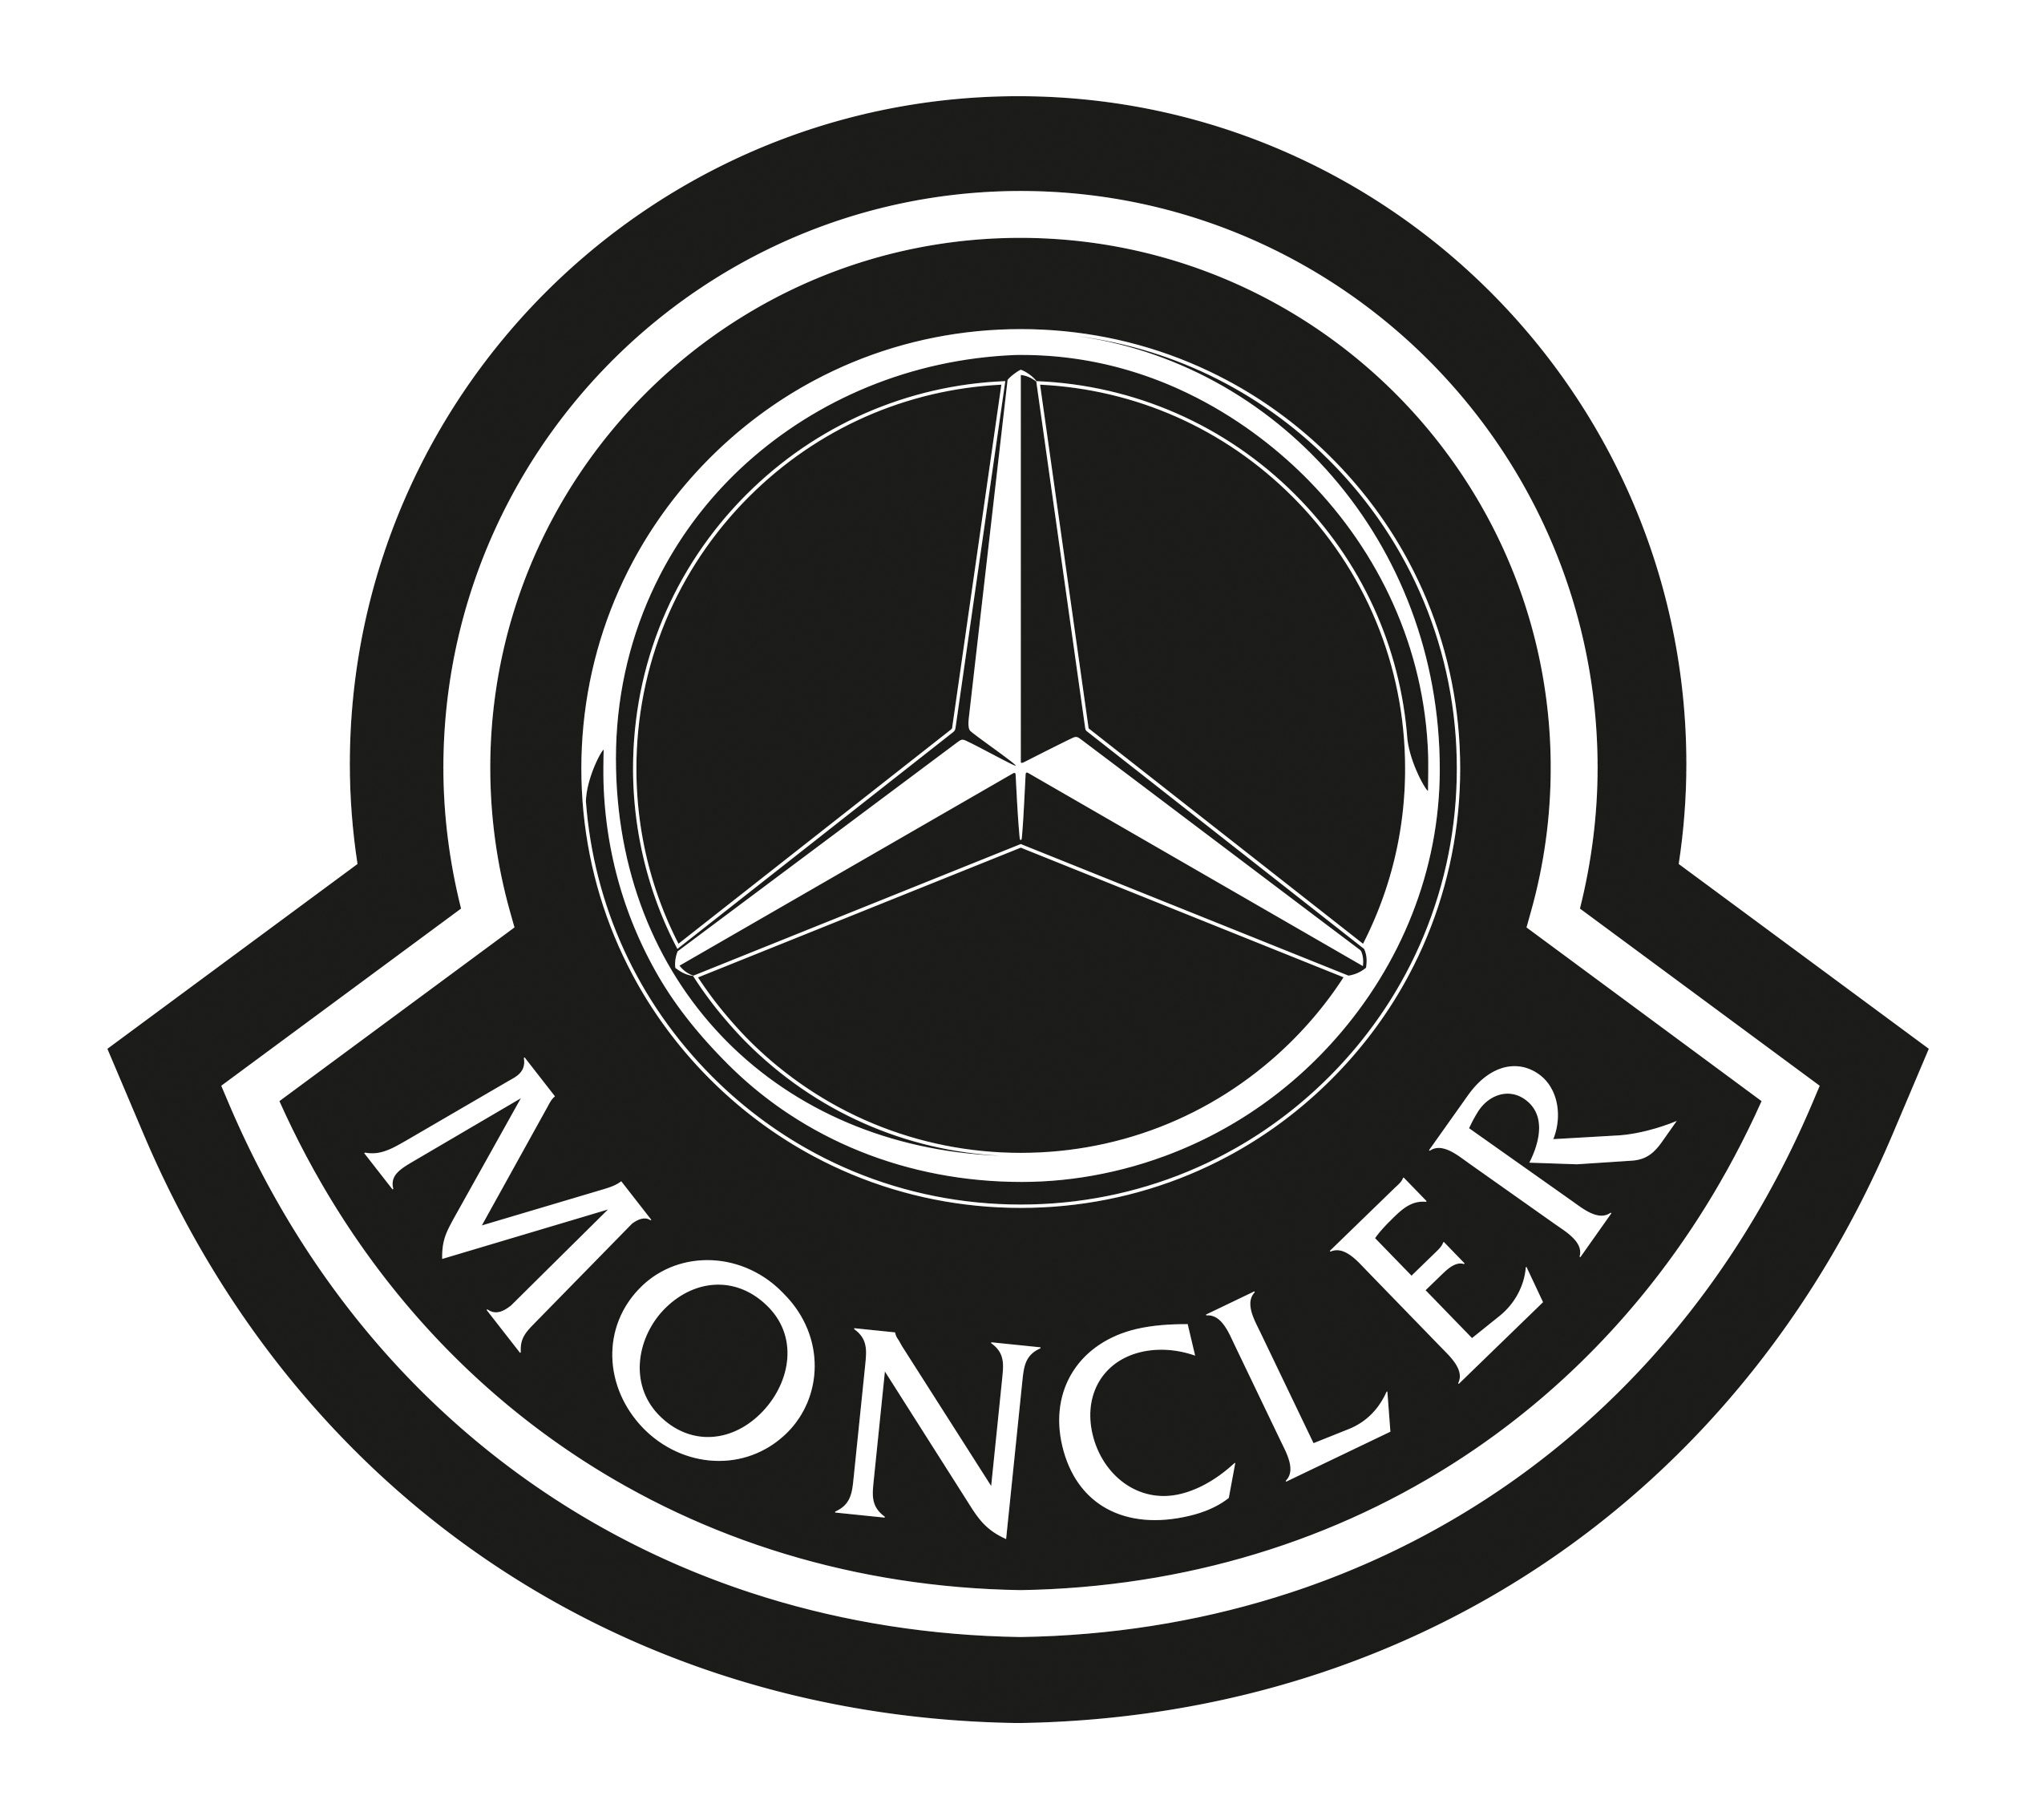 Mercedes-Benz and Moncler logos mashed together for the two brands' collaboration